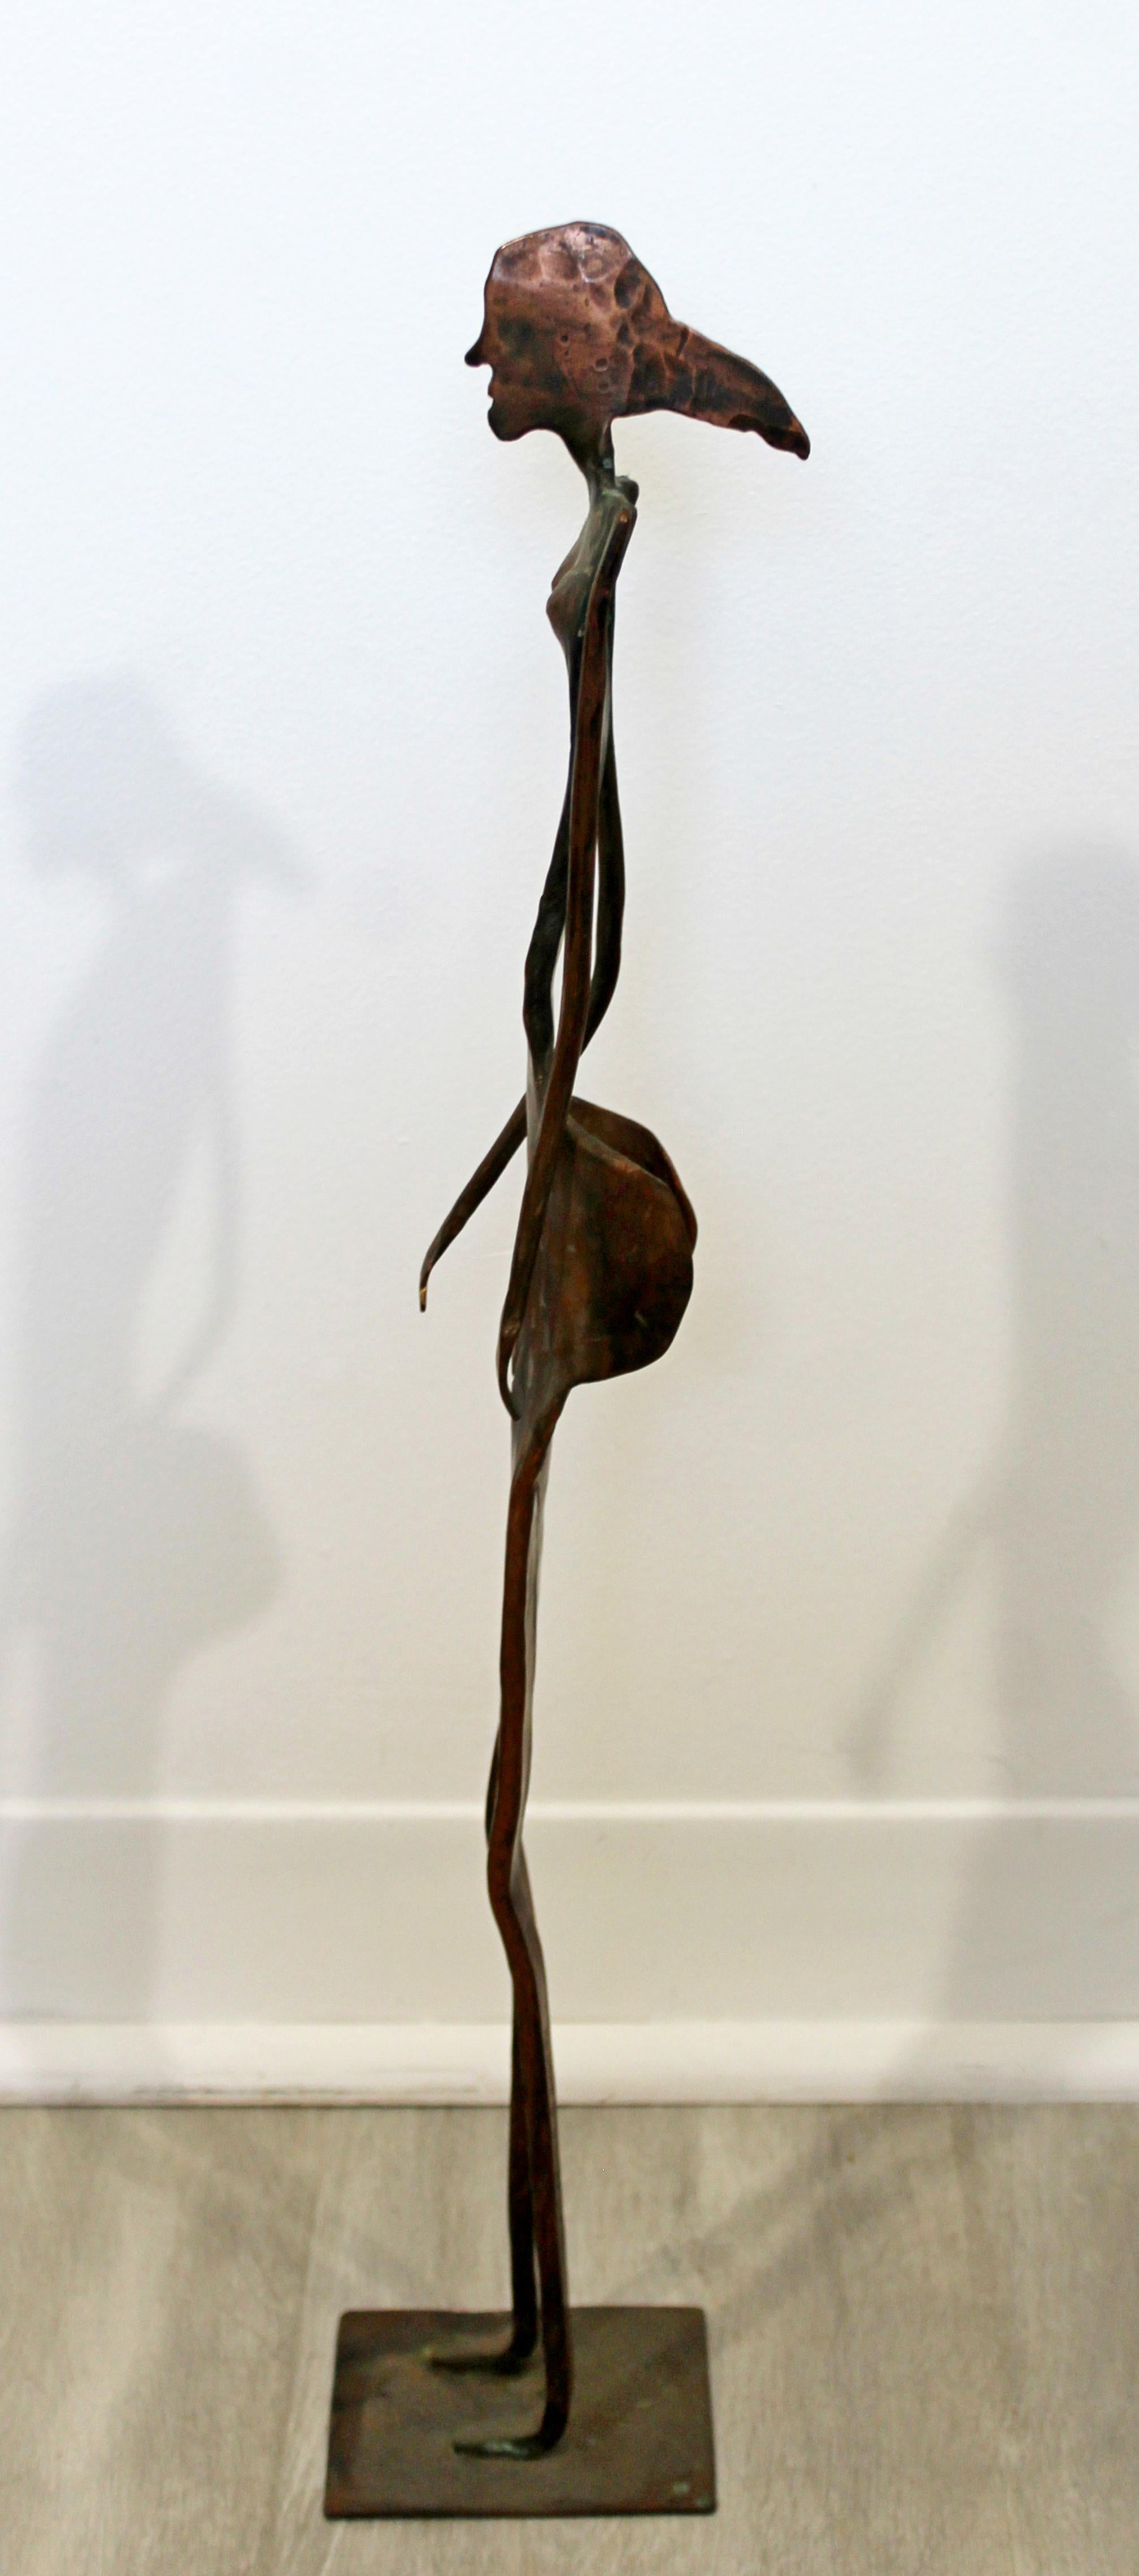 Contemporary Forged Copper Female Nude Figure Table Sculpture Signed Hansen 2001 For Sale 3